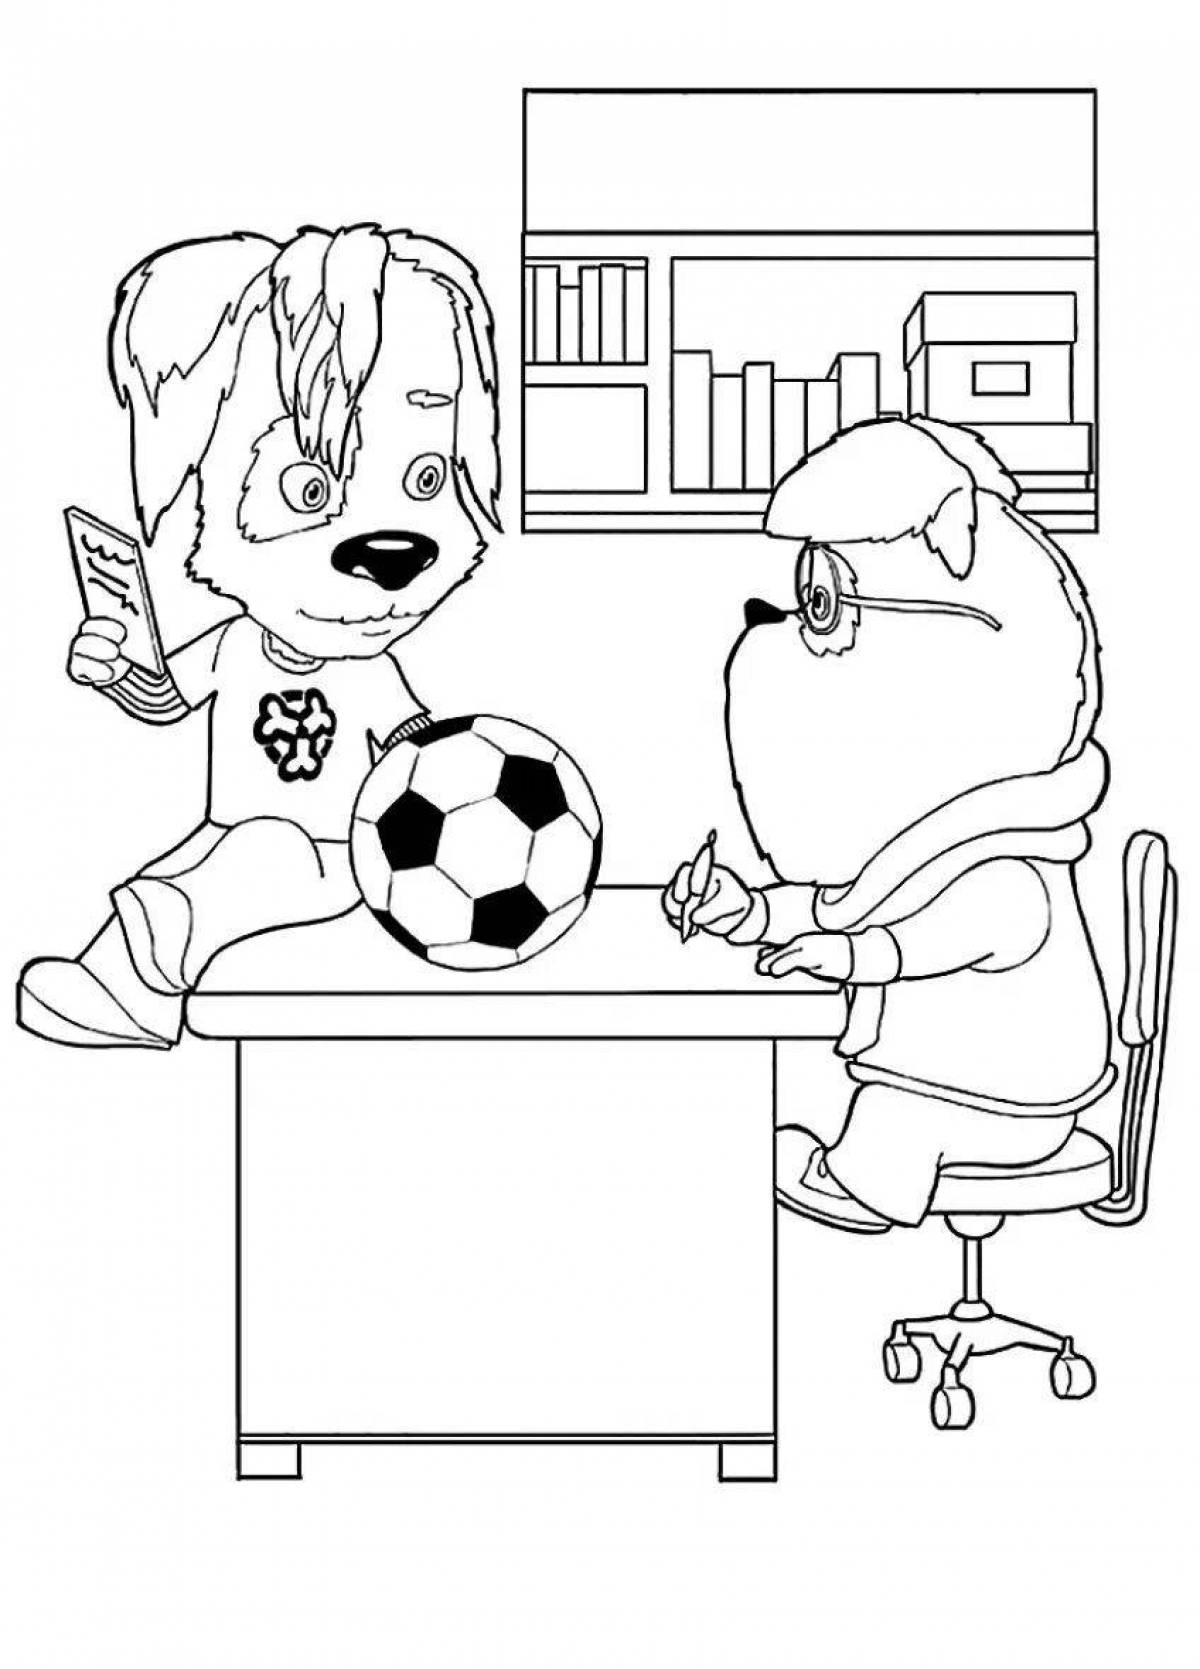 Coloring page crazy barboskin team